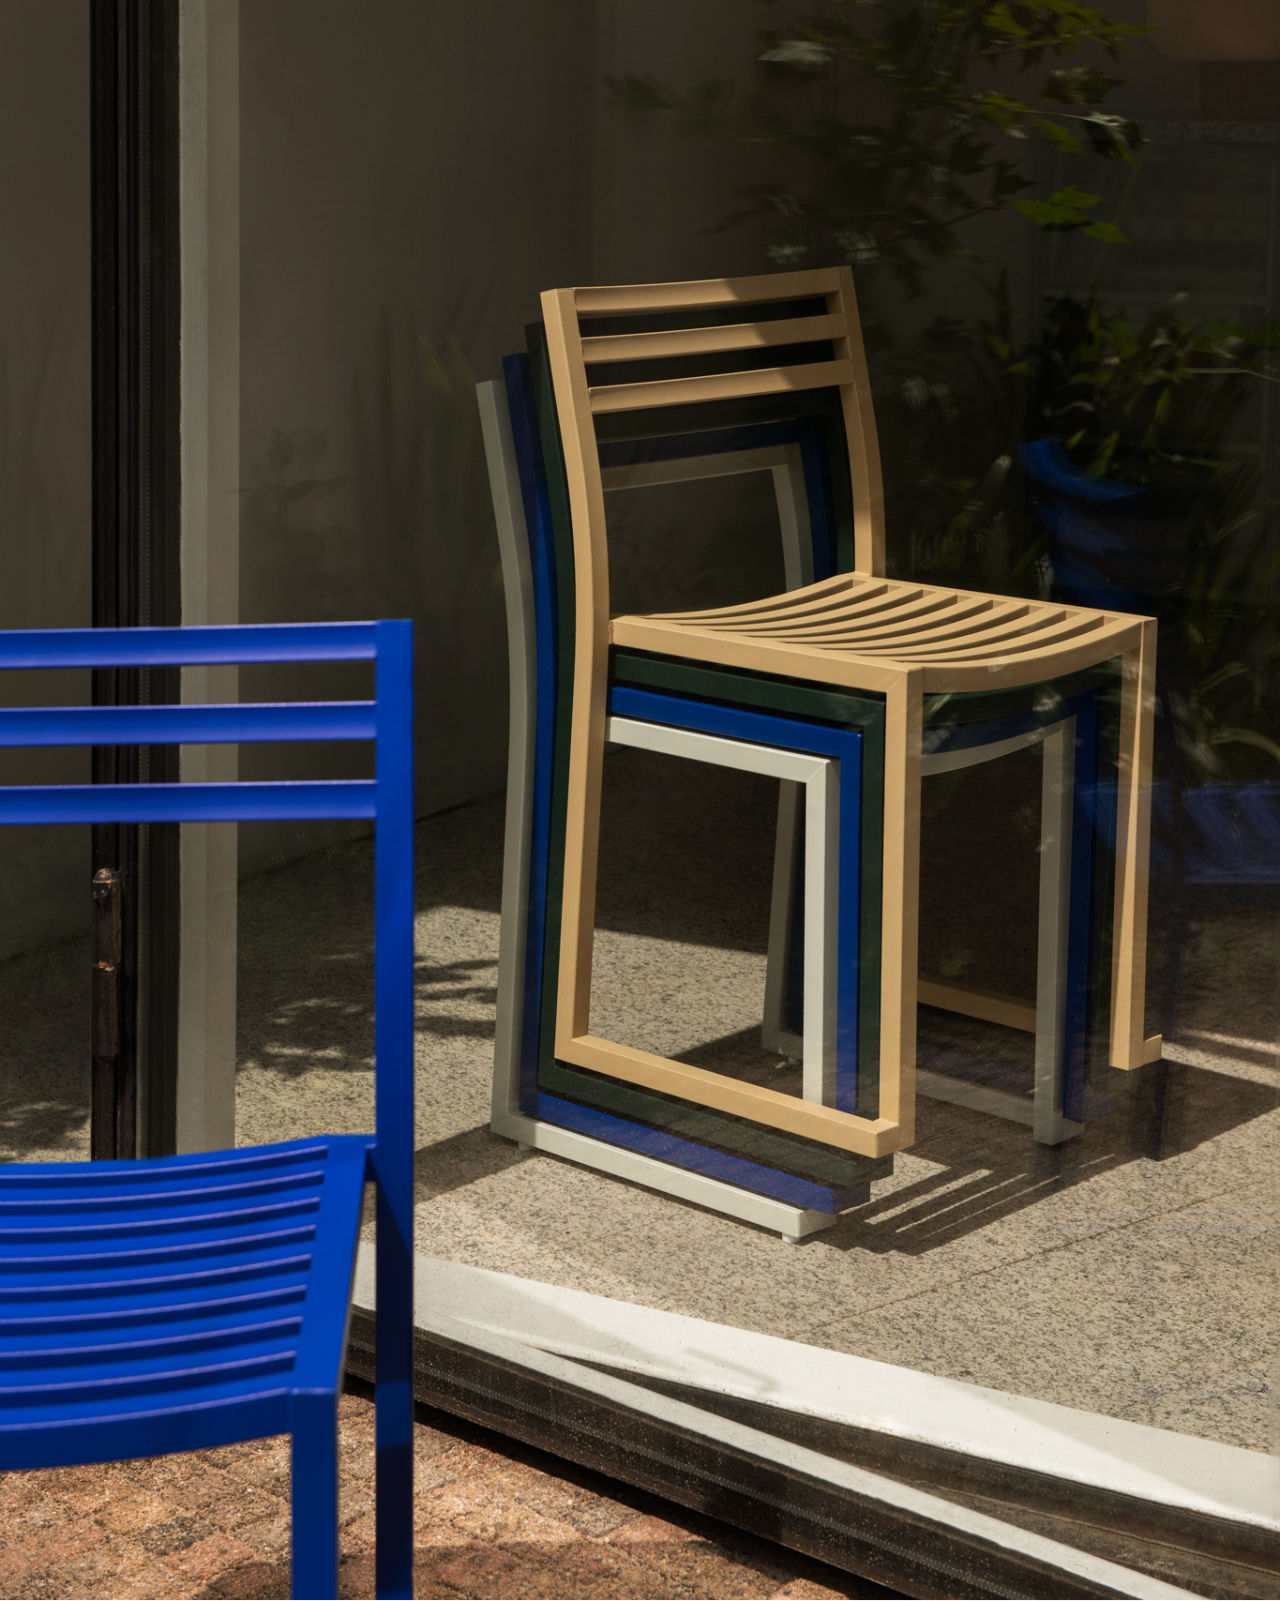 A lifestyle image of an outdoor scene featuring Chop Chairs stacked.